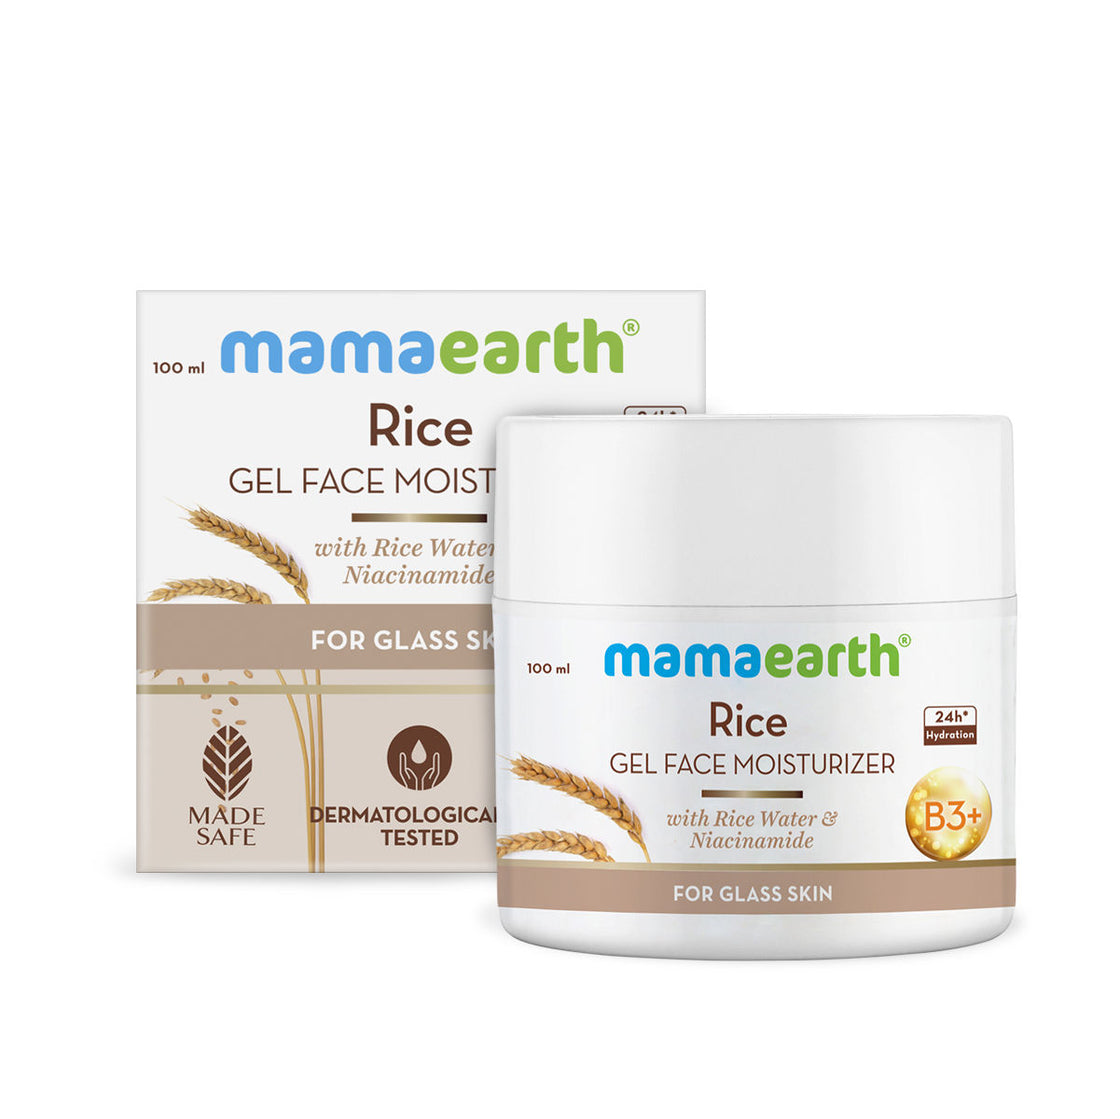 Mamaearth Rice Gel Face Moisturizer With Rice Water & Niacinamide For Glass Skin